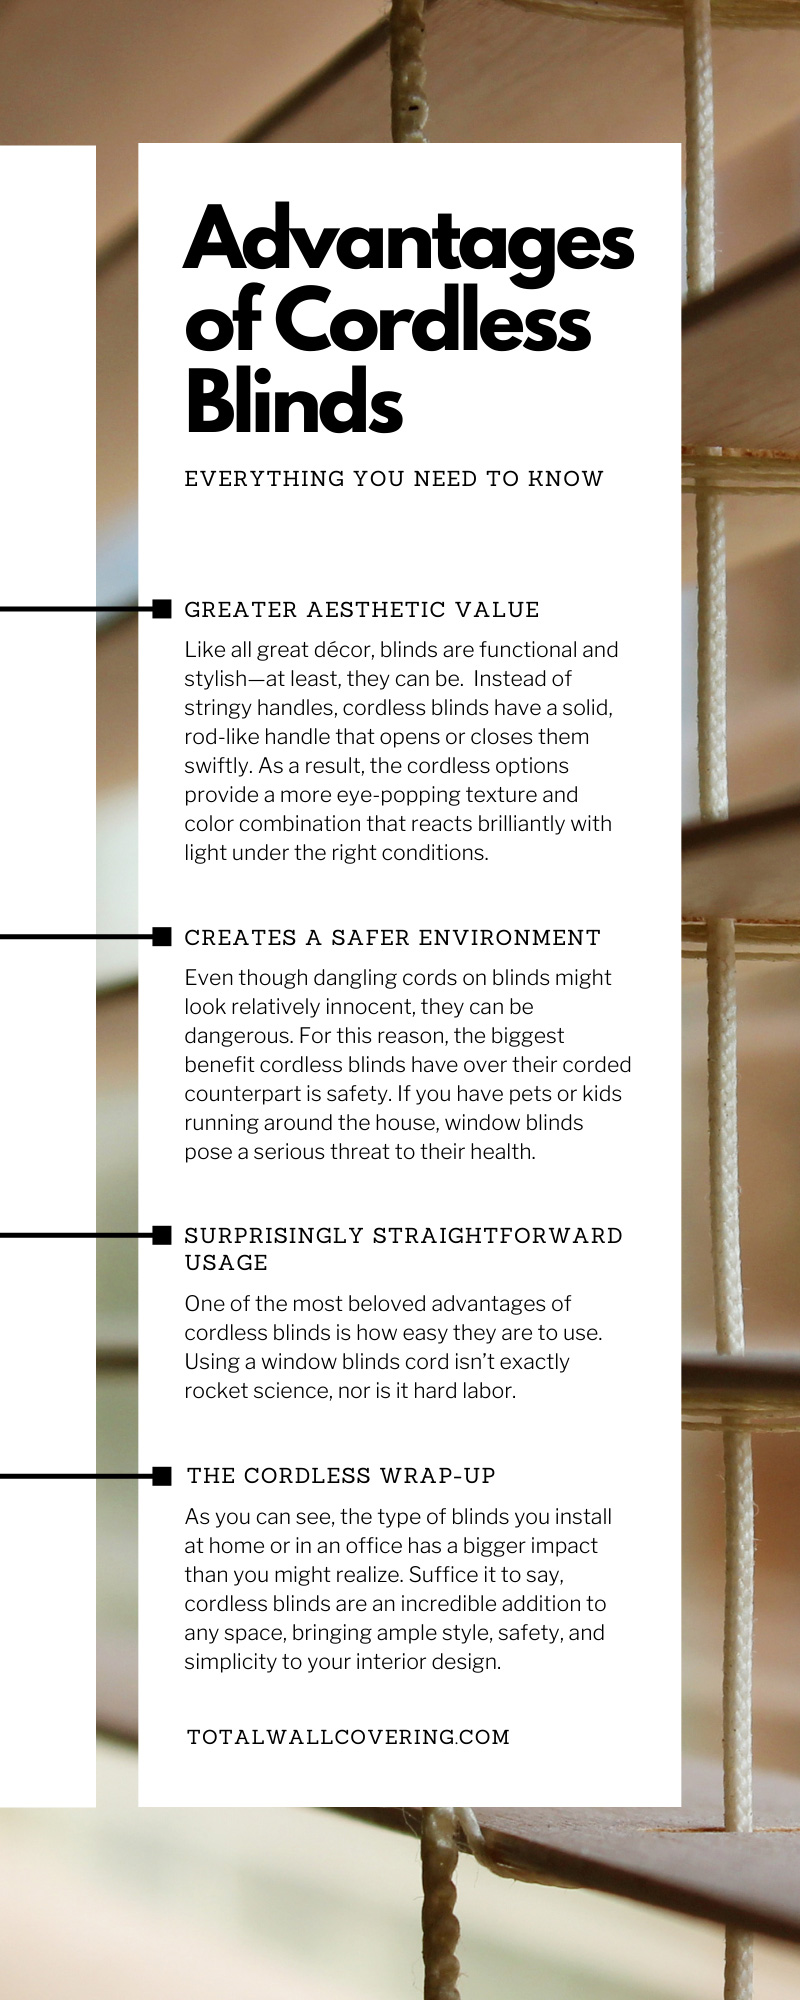 Advantages of Cordless Blinds – Everything You Need To Know infographic